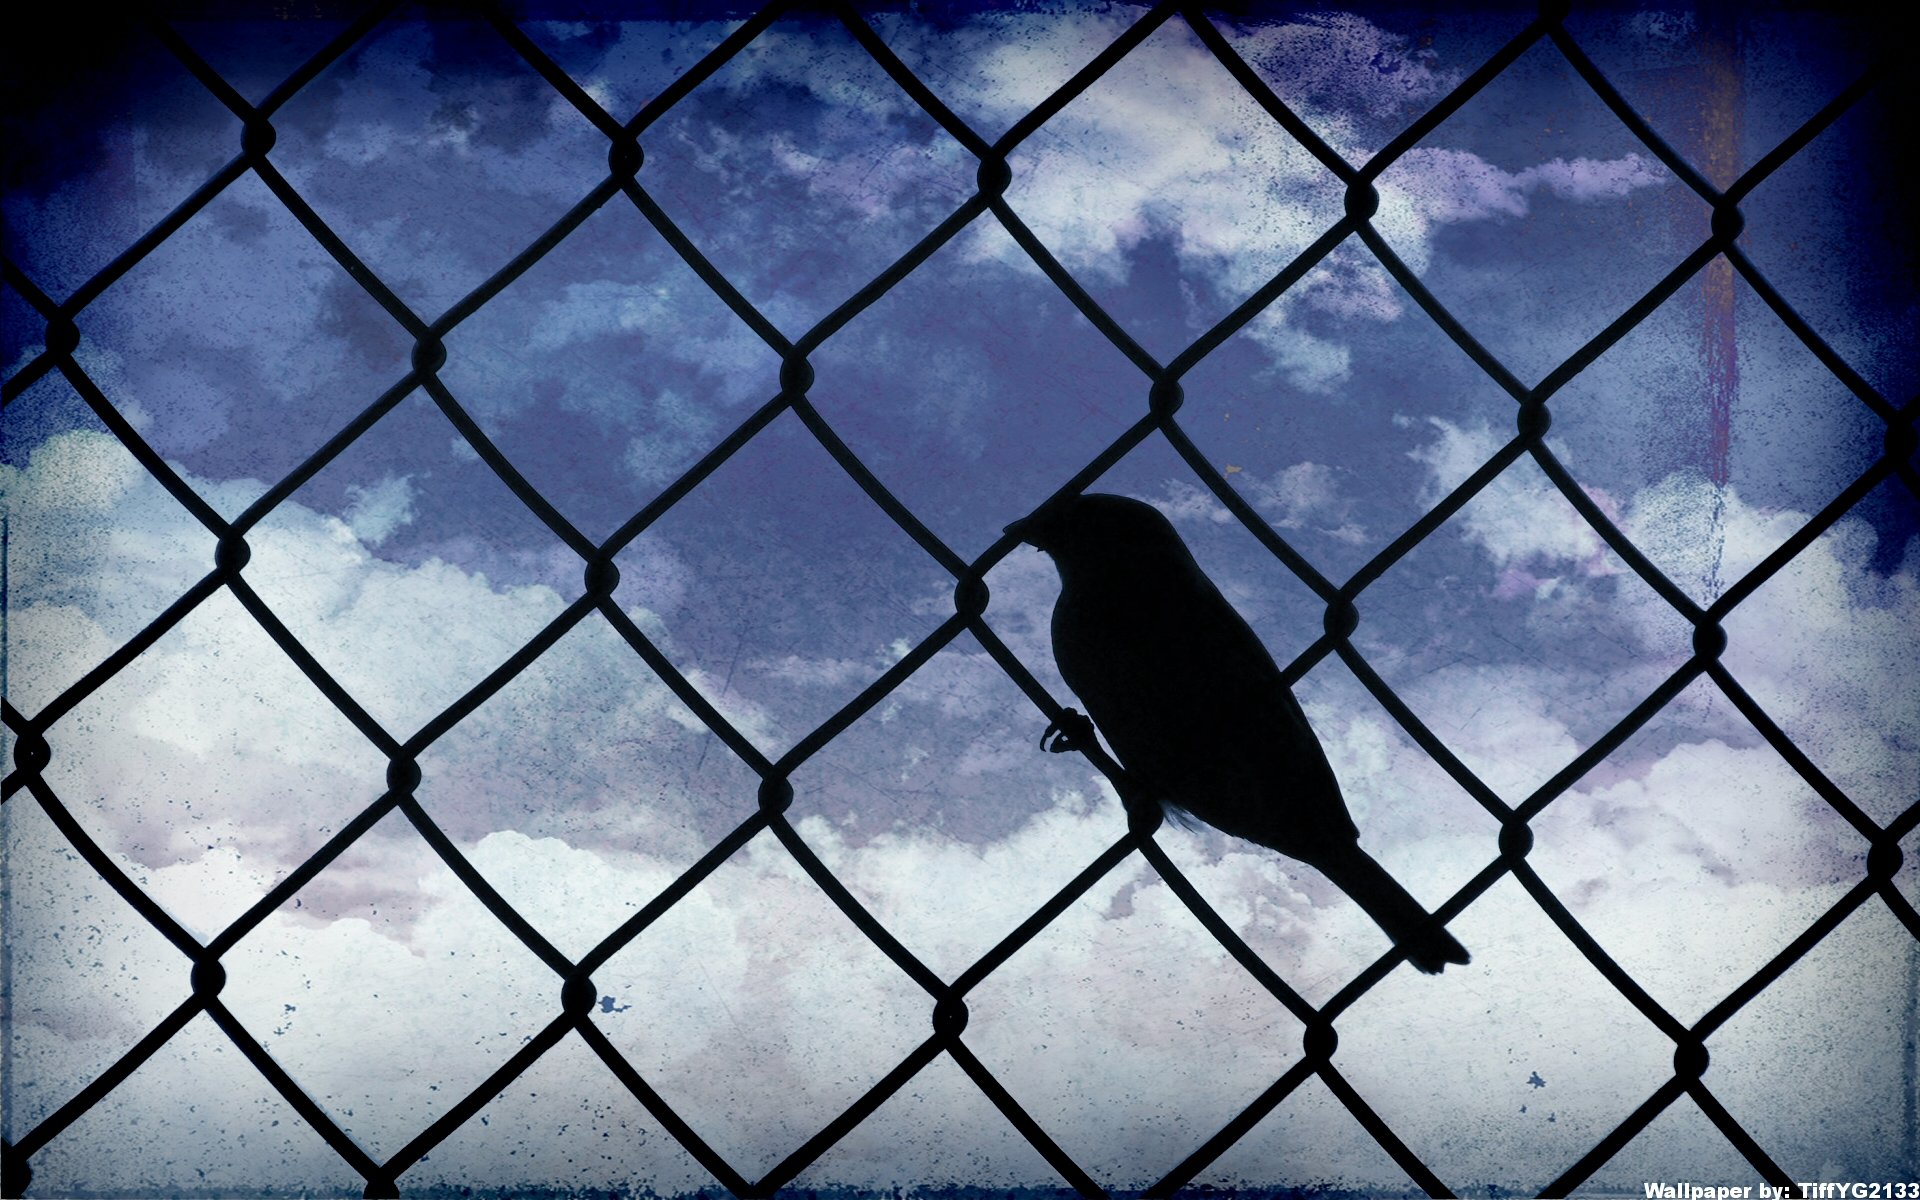 birds, Silhouettes, Skyscapes, Chain, Link, Fence Wallpaper